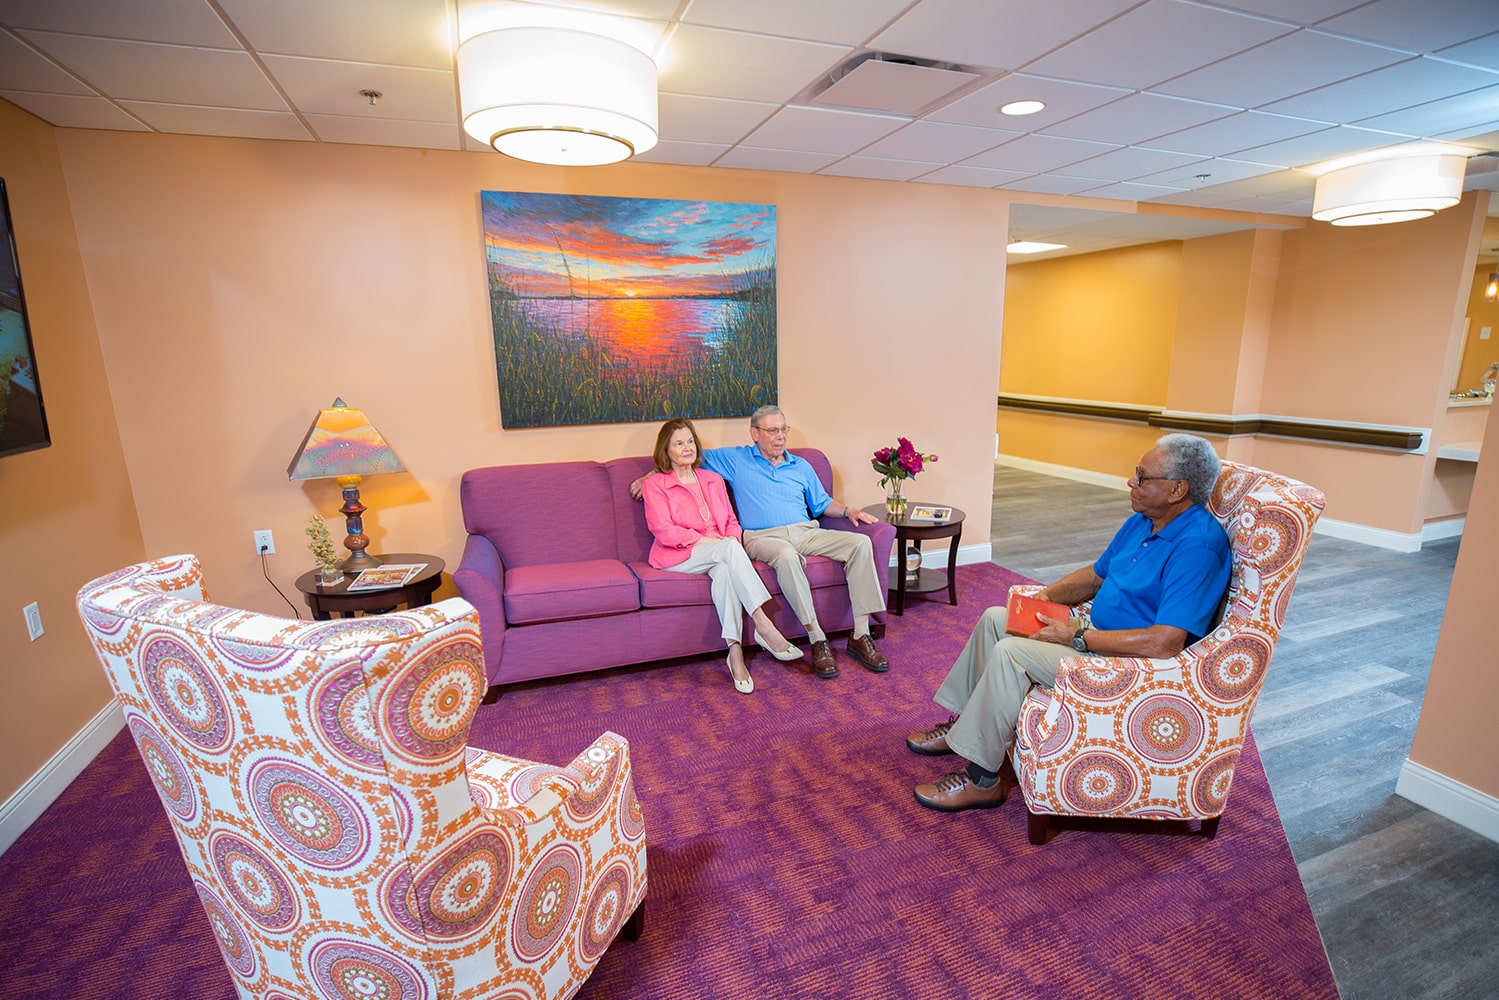 Group of rehab patients sitting together in a sitting room with a colorful couch and chairs